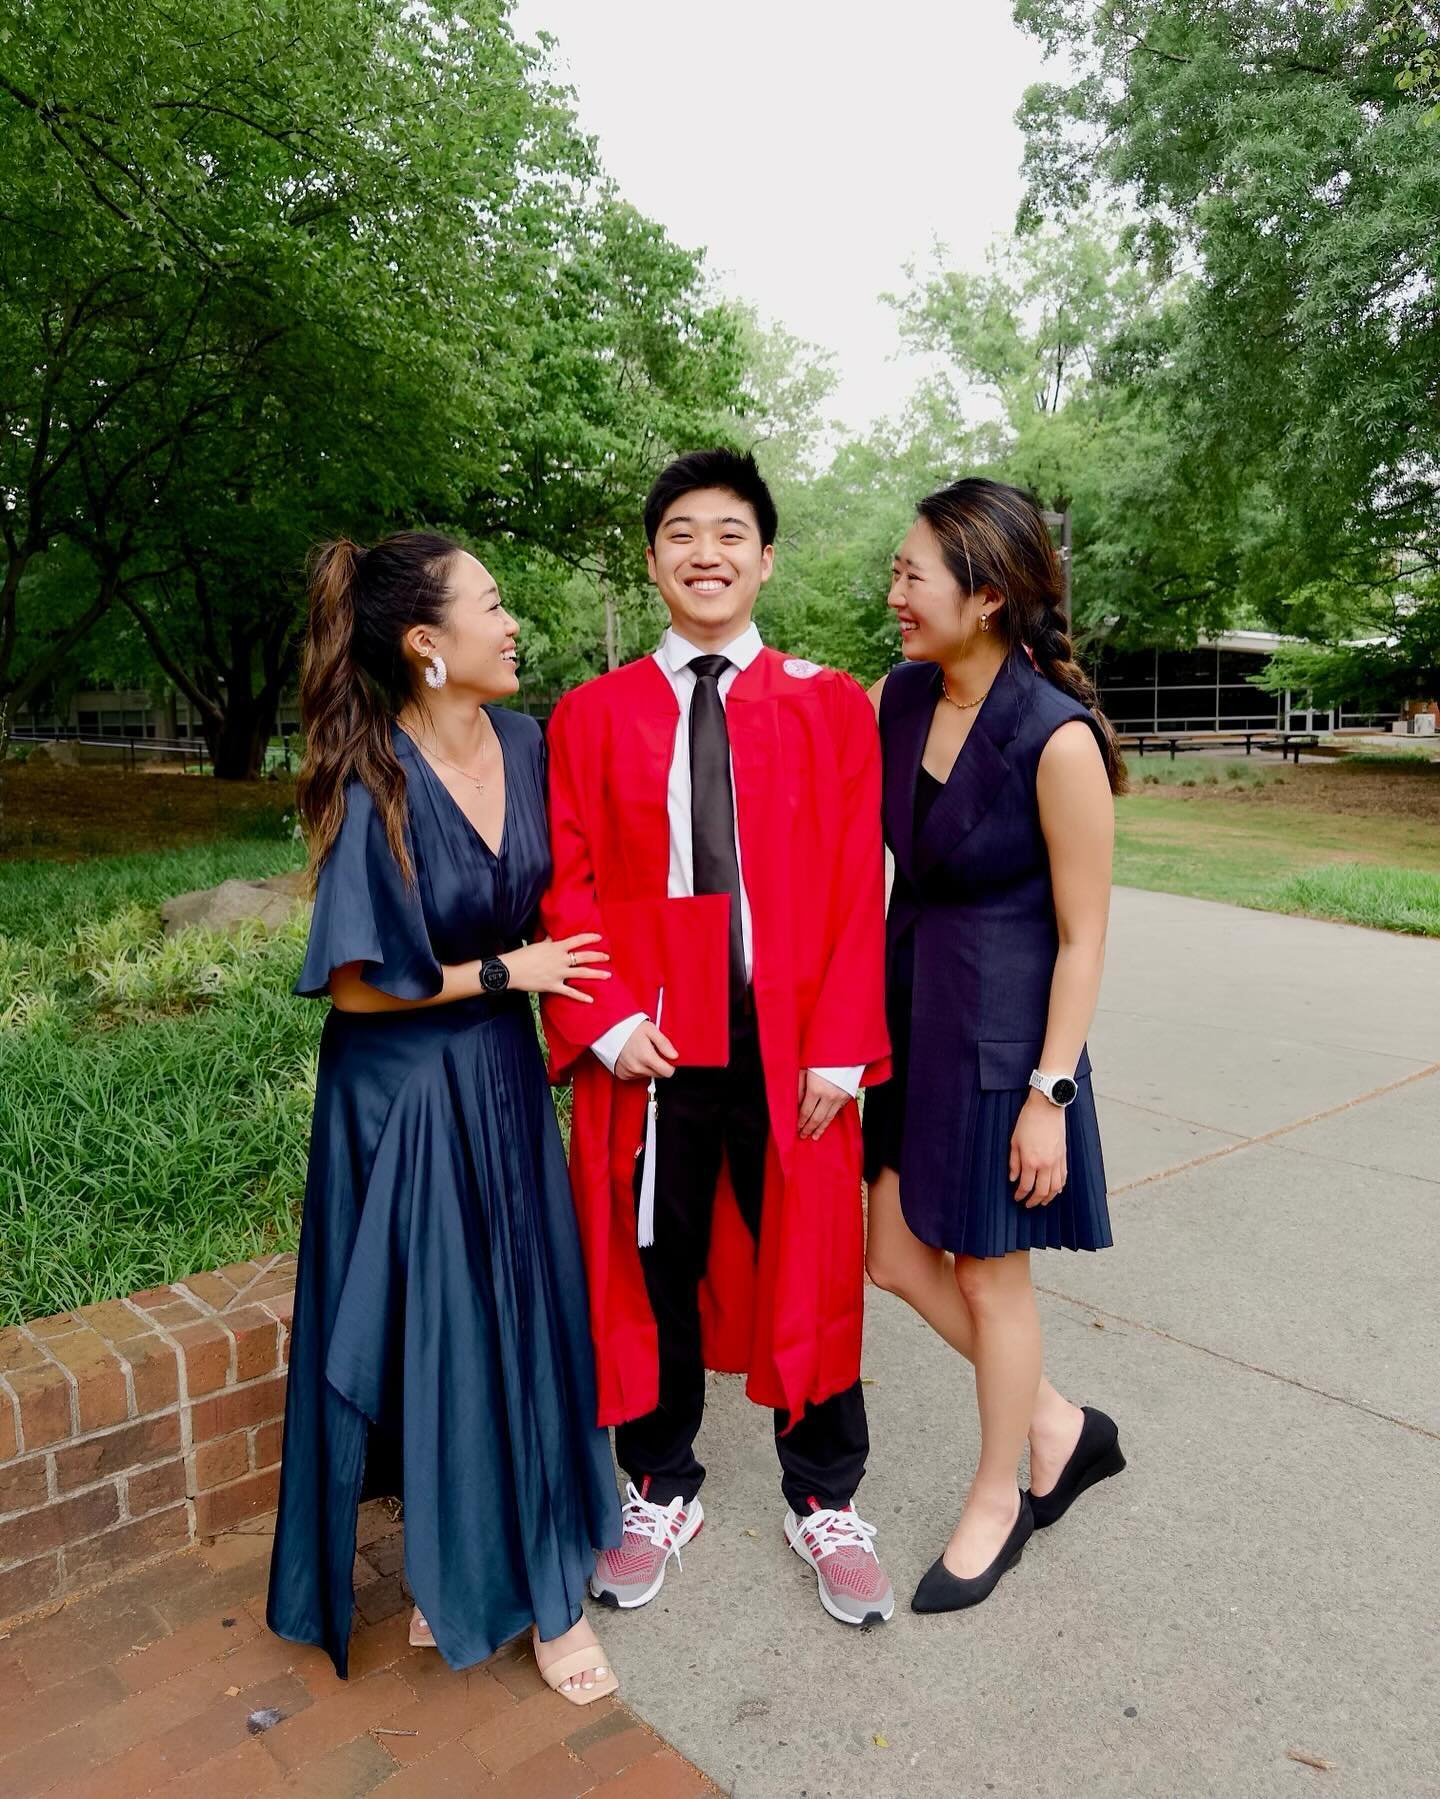 3/3 of the Lee siblings have officially graduated college 🥲🎓// now we have two chemical engineers in the Lee household. We&rsquo;re so proud of you @thelegitdan on this huge milestone. You&rsquo;re finally a college grad! 🐺❤️

#graduation #college